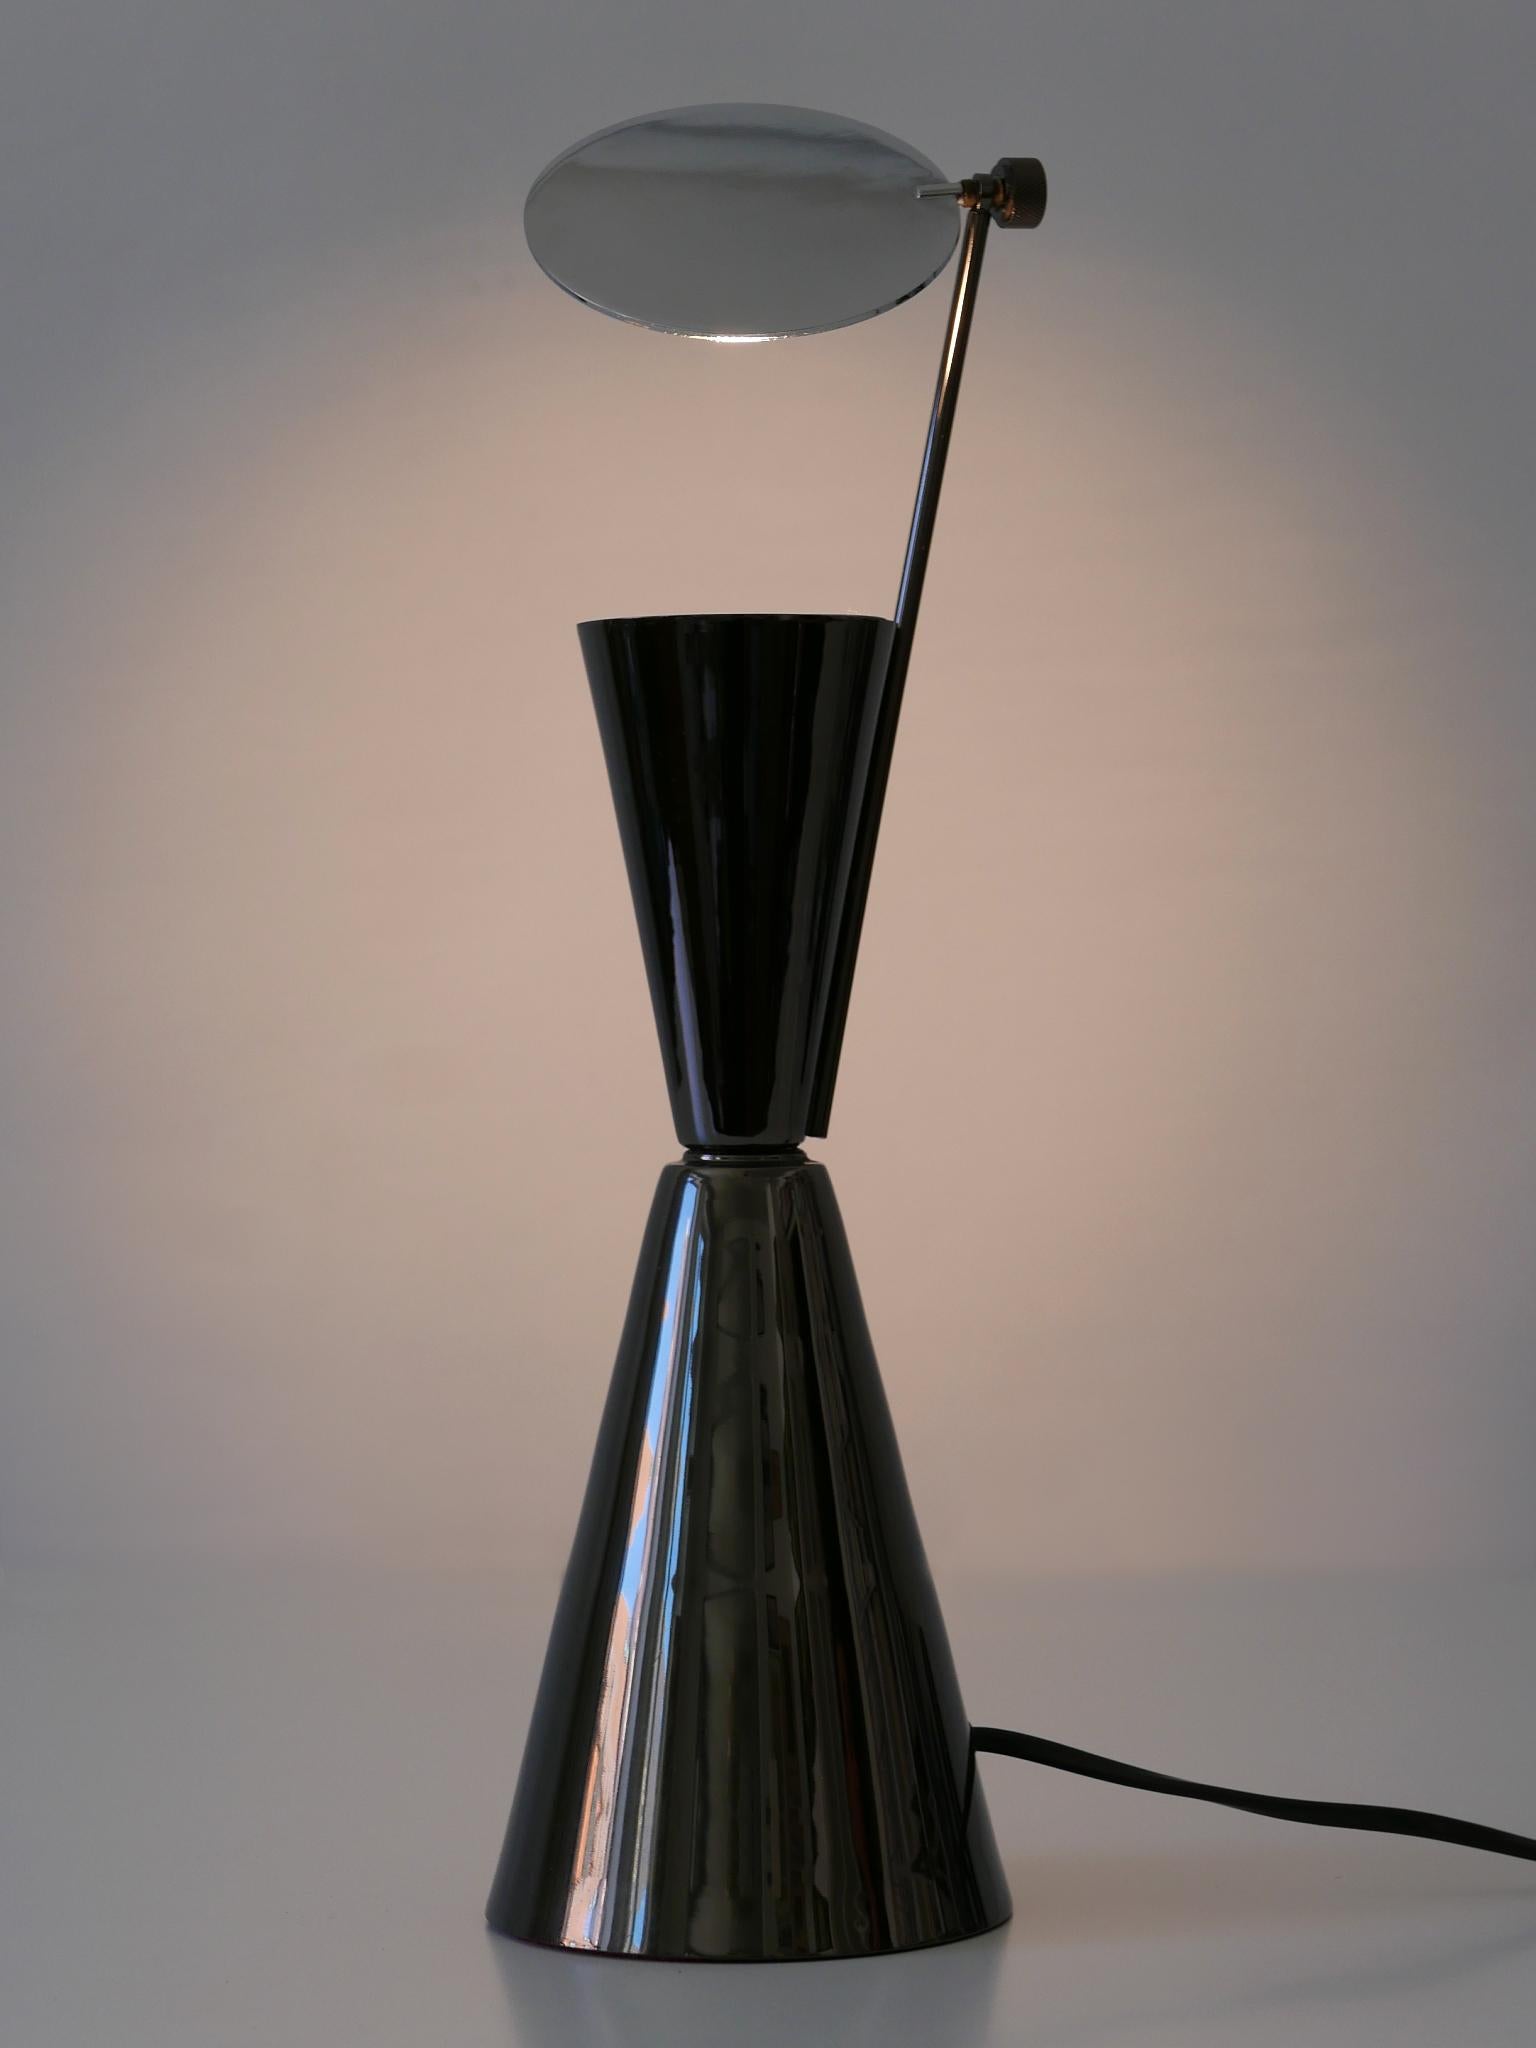 Rare and elegant Modernist diabolo table lamp with an adjustable, rotating metal reflector. Designed and manufactured in 1980s, Spain.

Executed in nickel-plated and gray metallic enameled metal, the lamp needs 1 x halogen bulb, is wired, and in